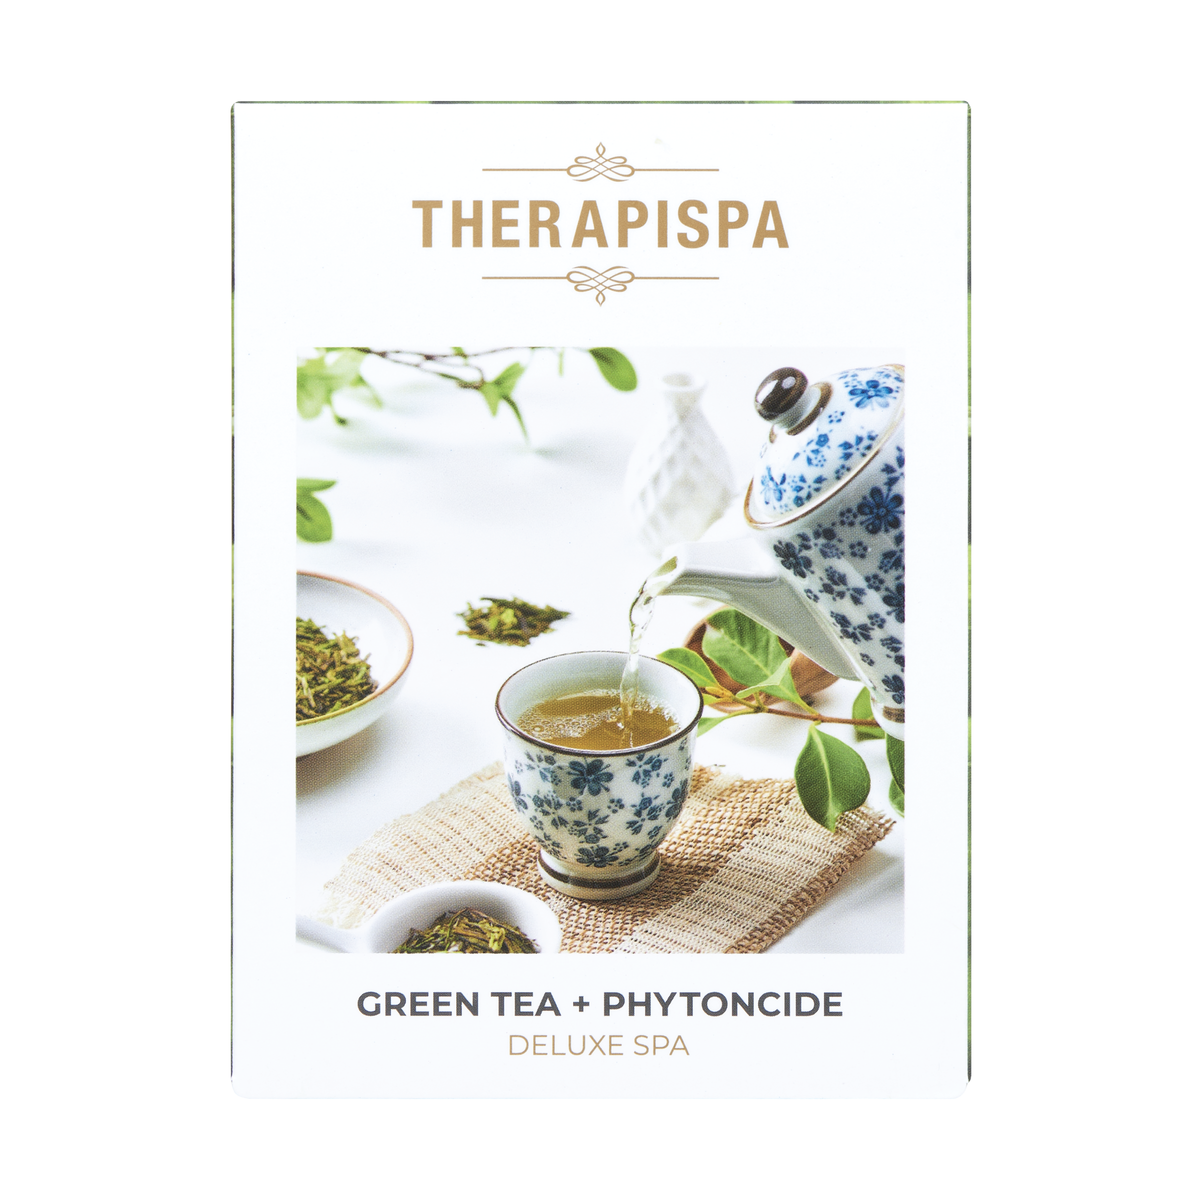 Deluxe Spa Kit / Green Tea + Phytoncide